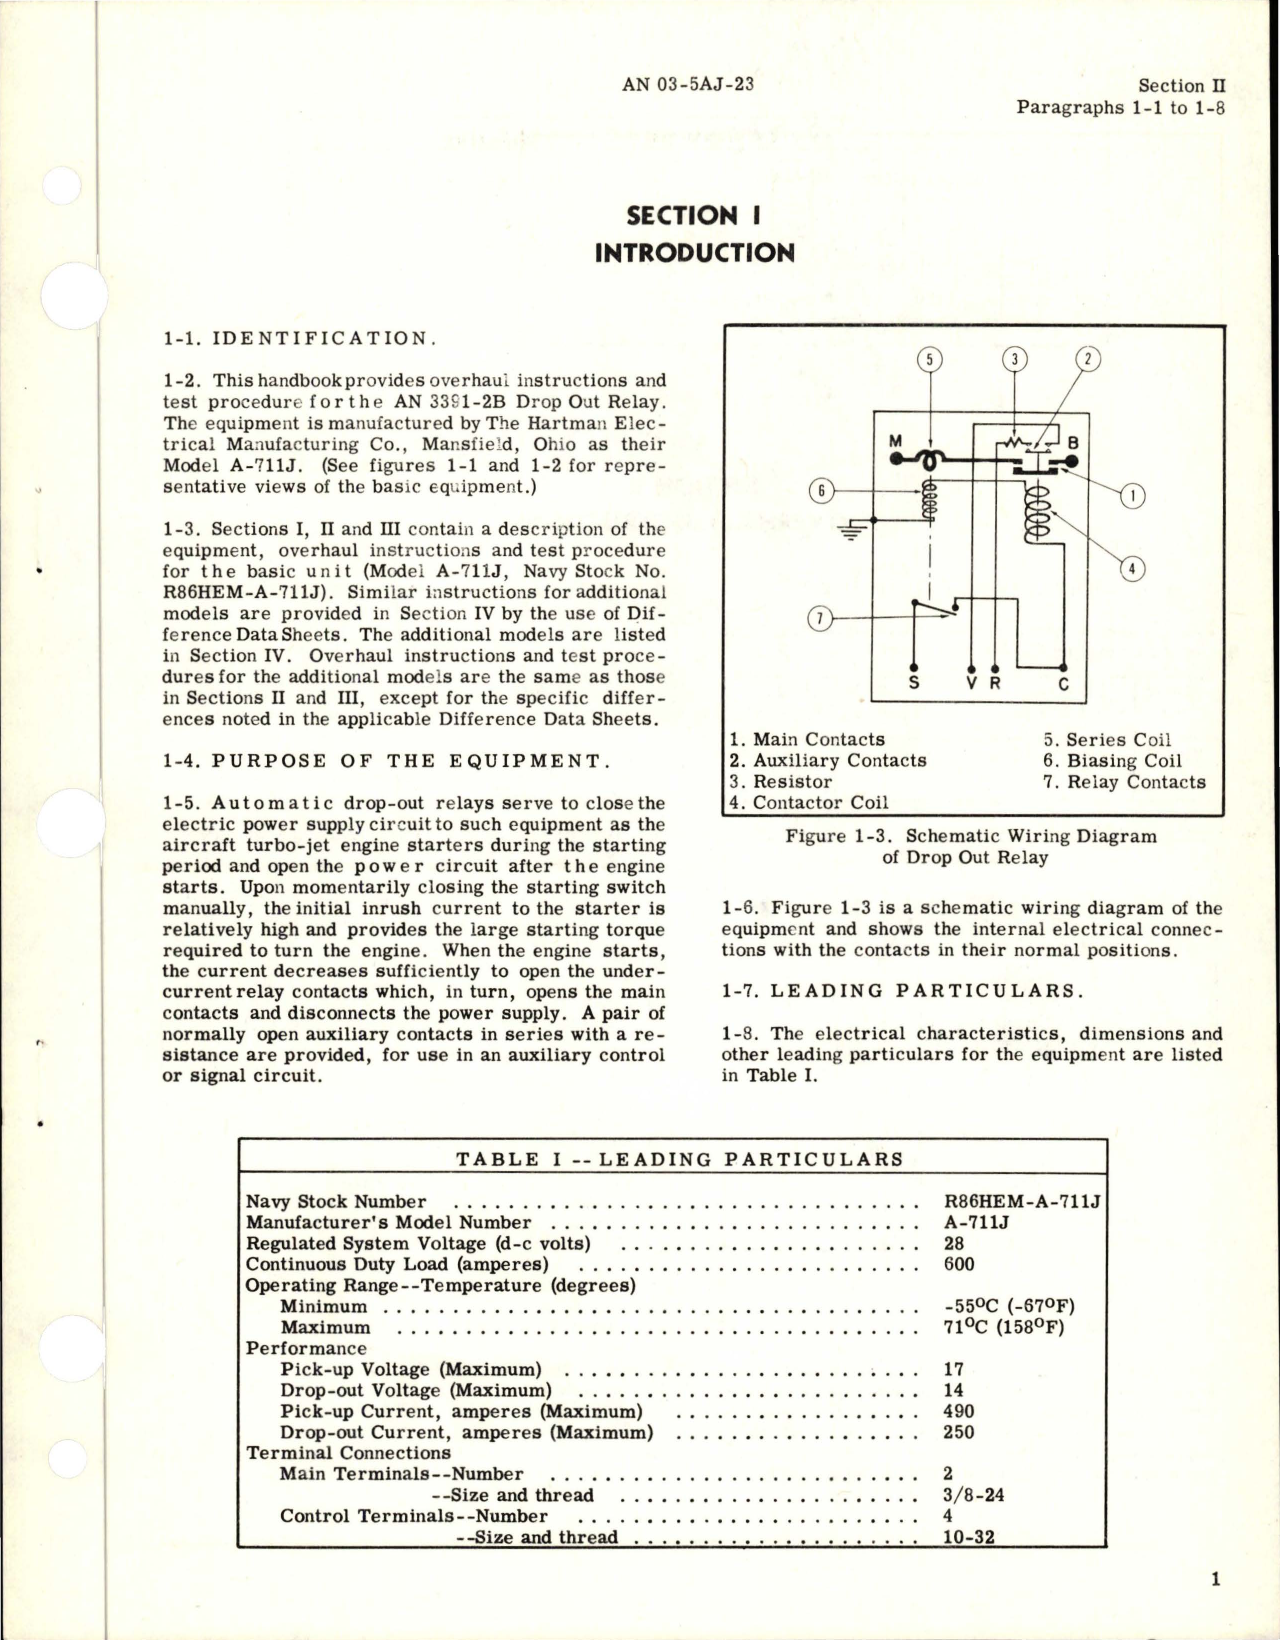 Sample page 5 from AirCorps Library document: Overhaul Instructions for Dropout Relay - Model A-711J and A-711K - Type AN3391-2B and AN3391-2A 